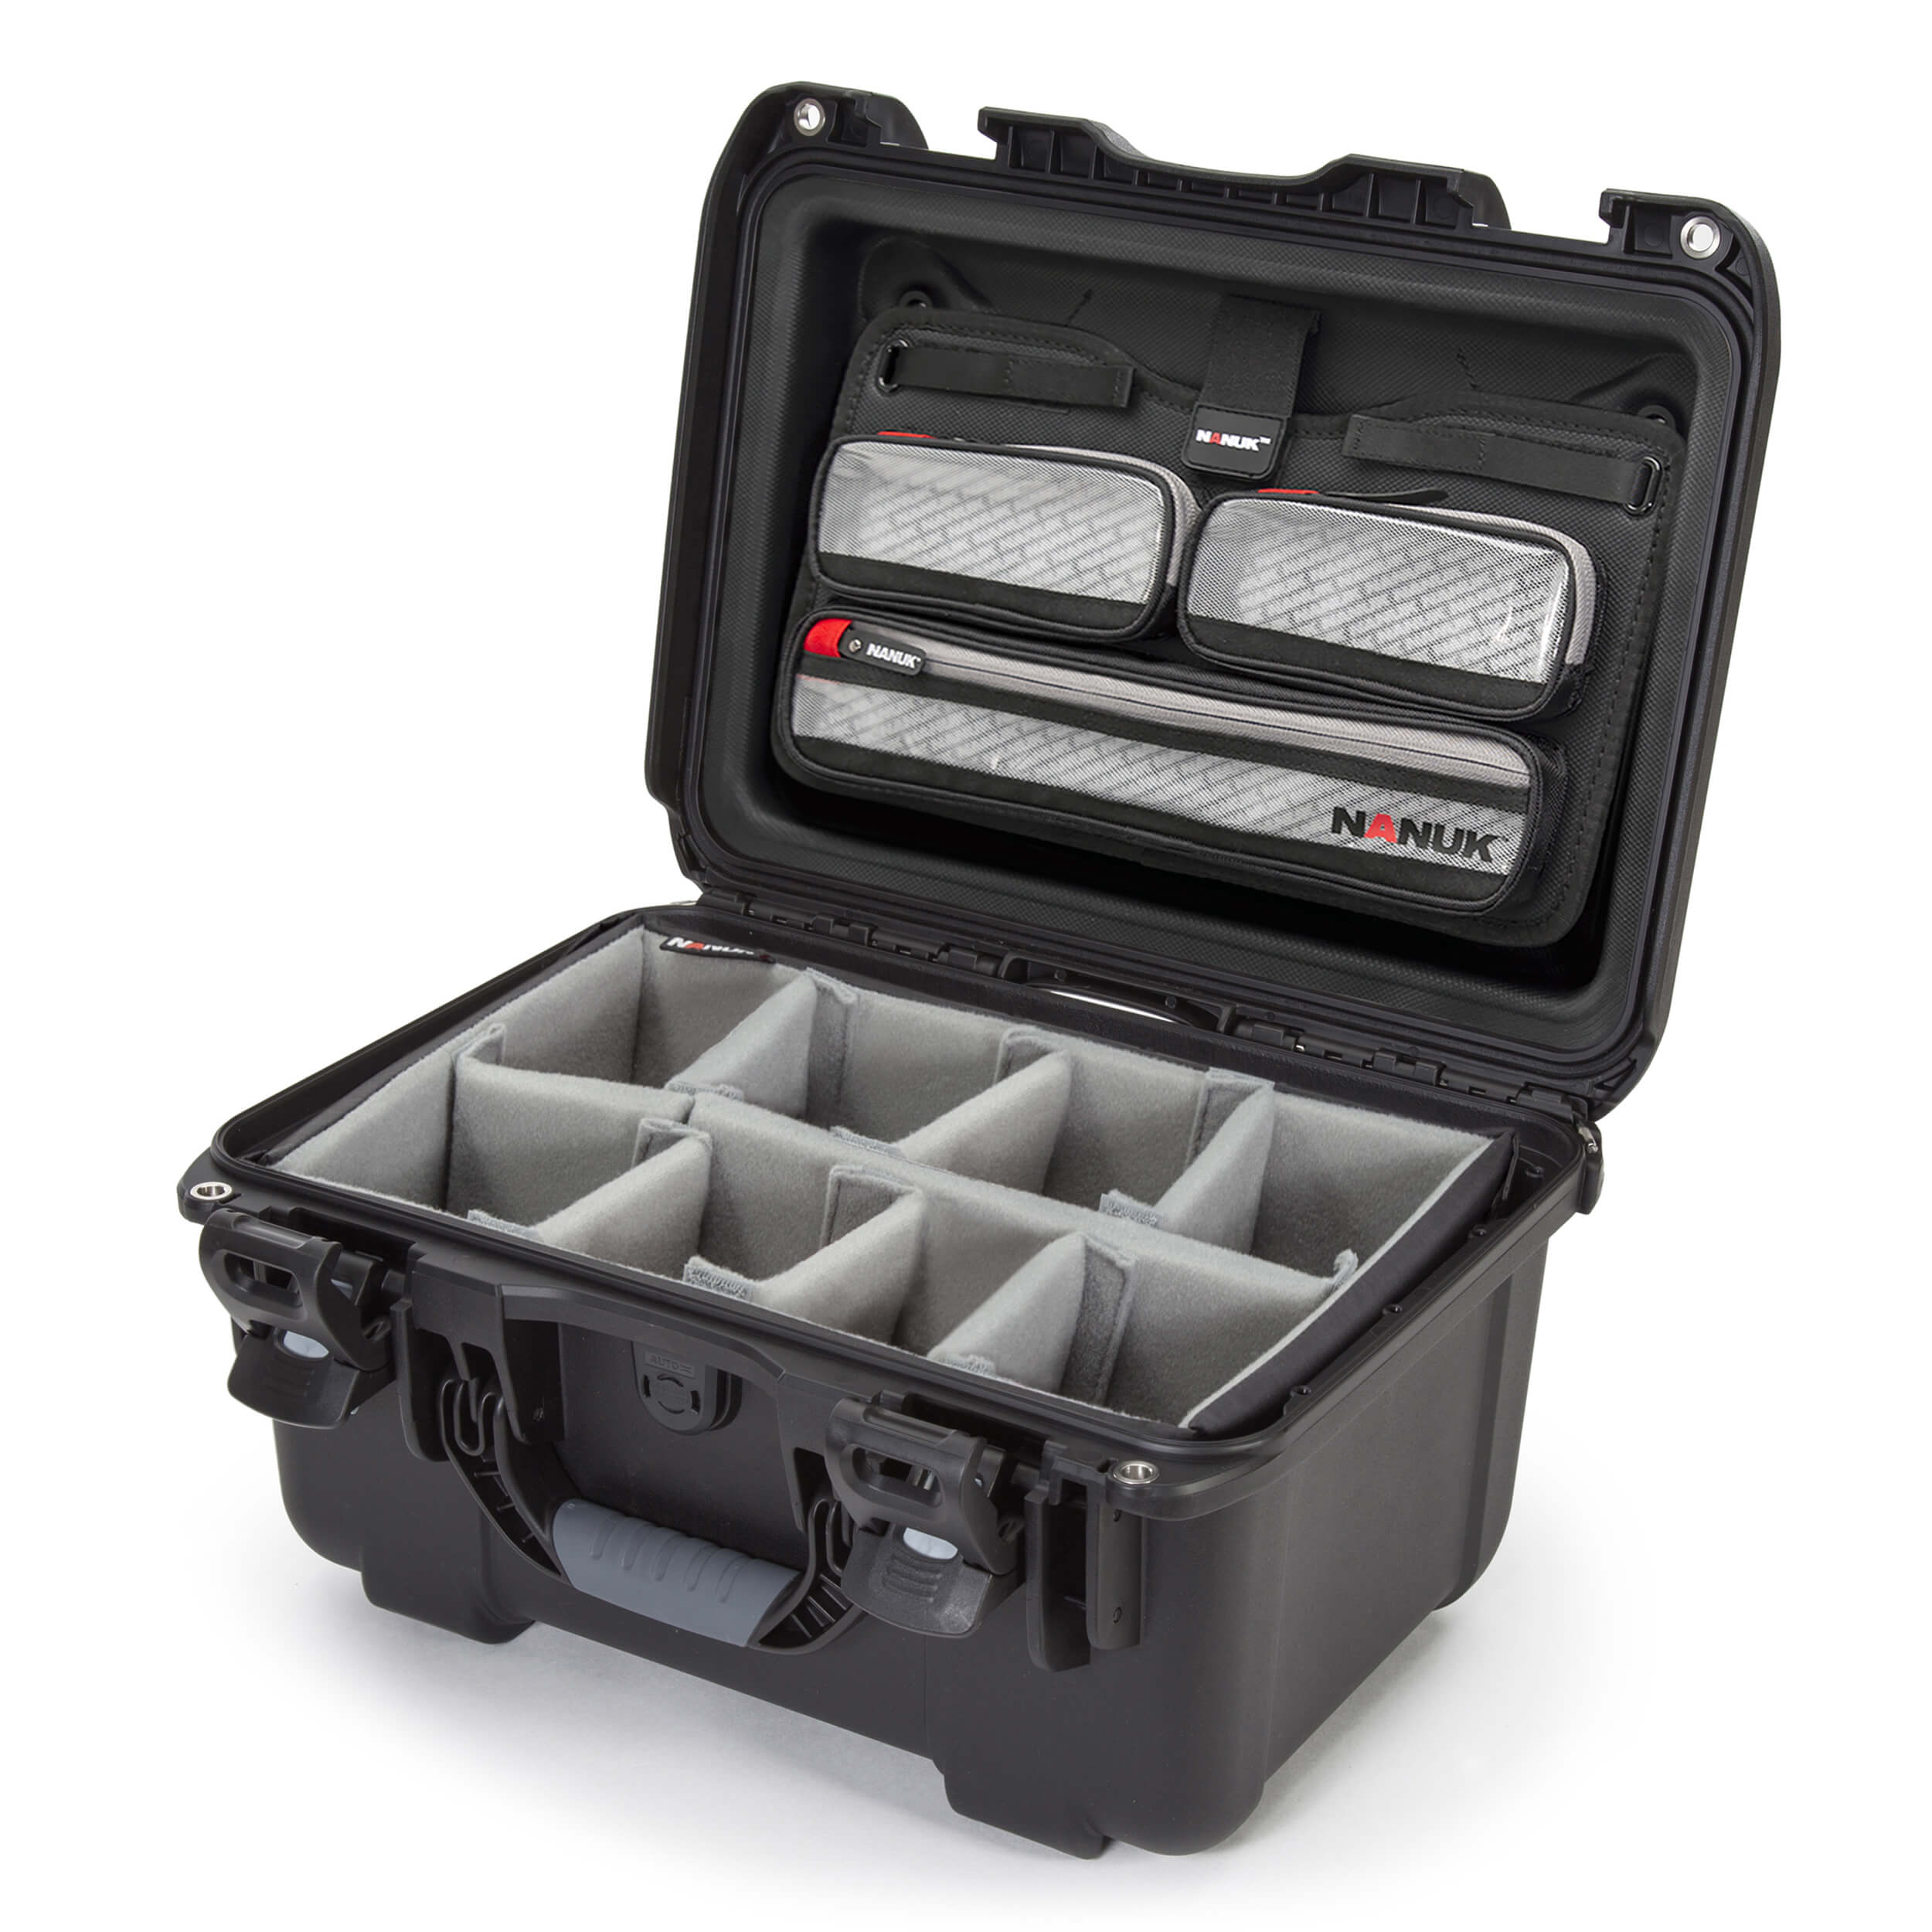 Nanuk 918 Case with Lid Organizer and Divider Black 918-6001